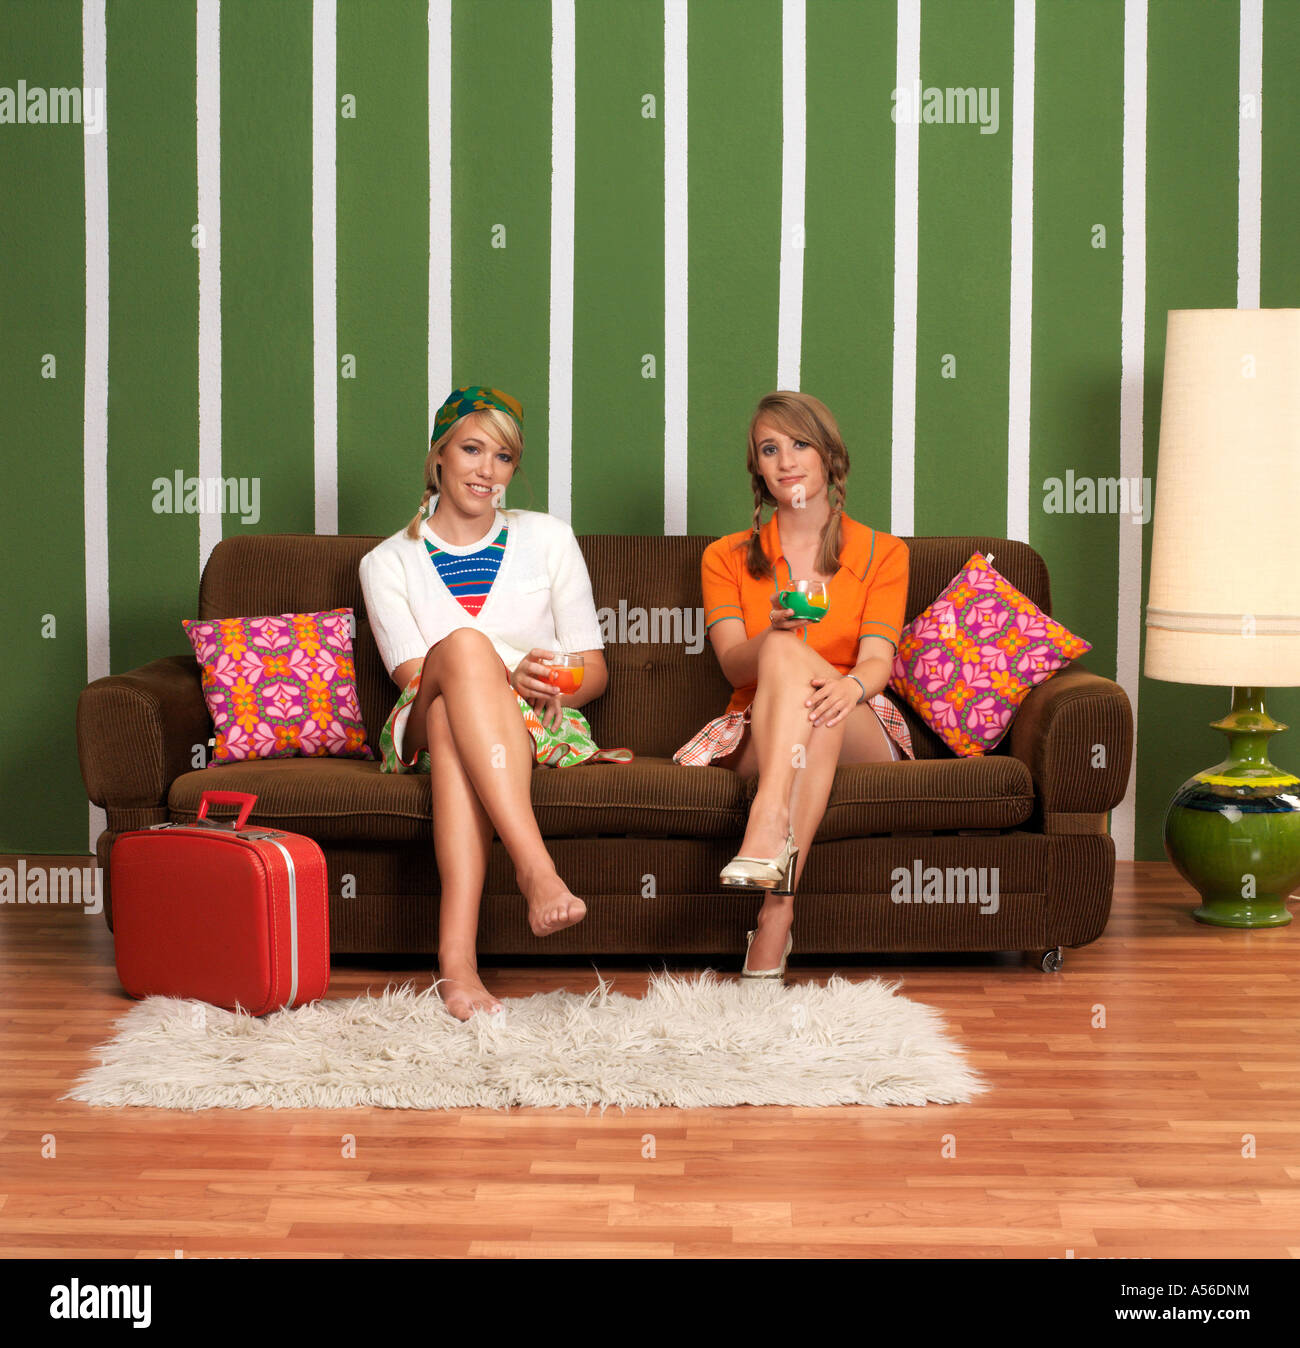 Page 3 - Legs Two Women On Sofa High Resolution Stock Photography and  Images - Alamy